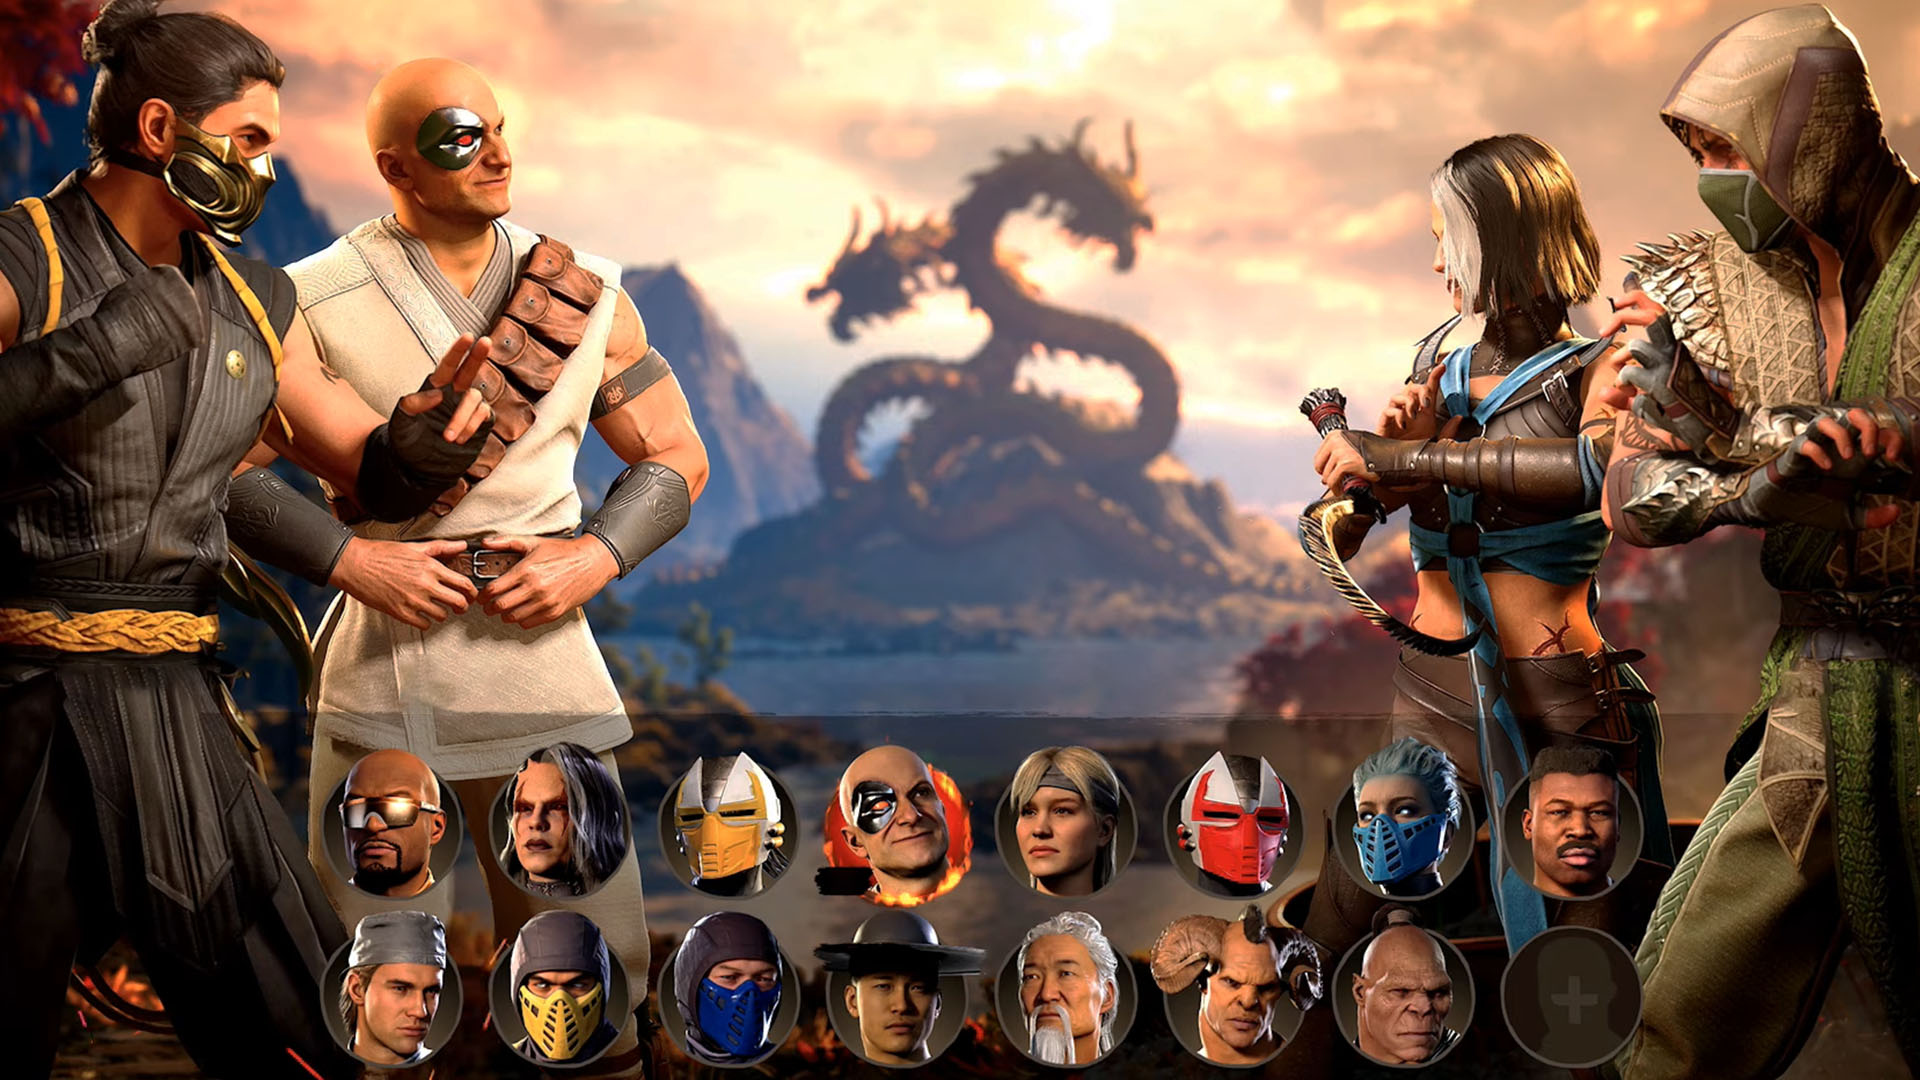 How to unlock all characters in Mortal Kombat 1